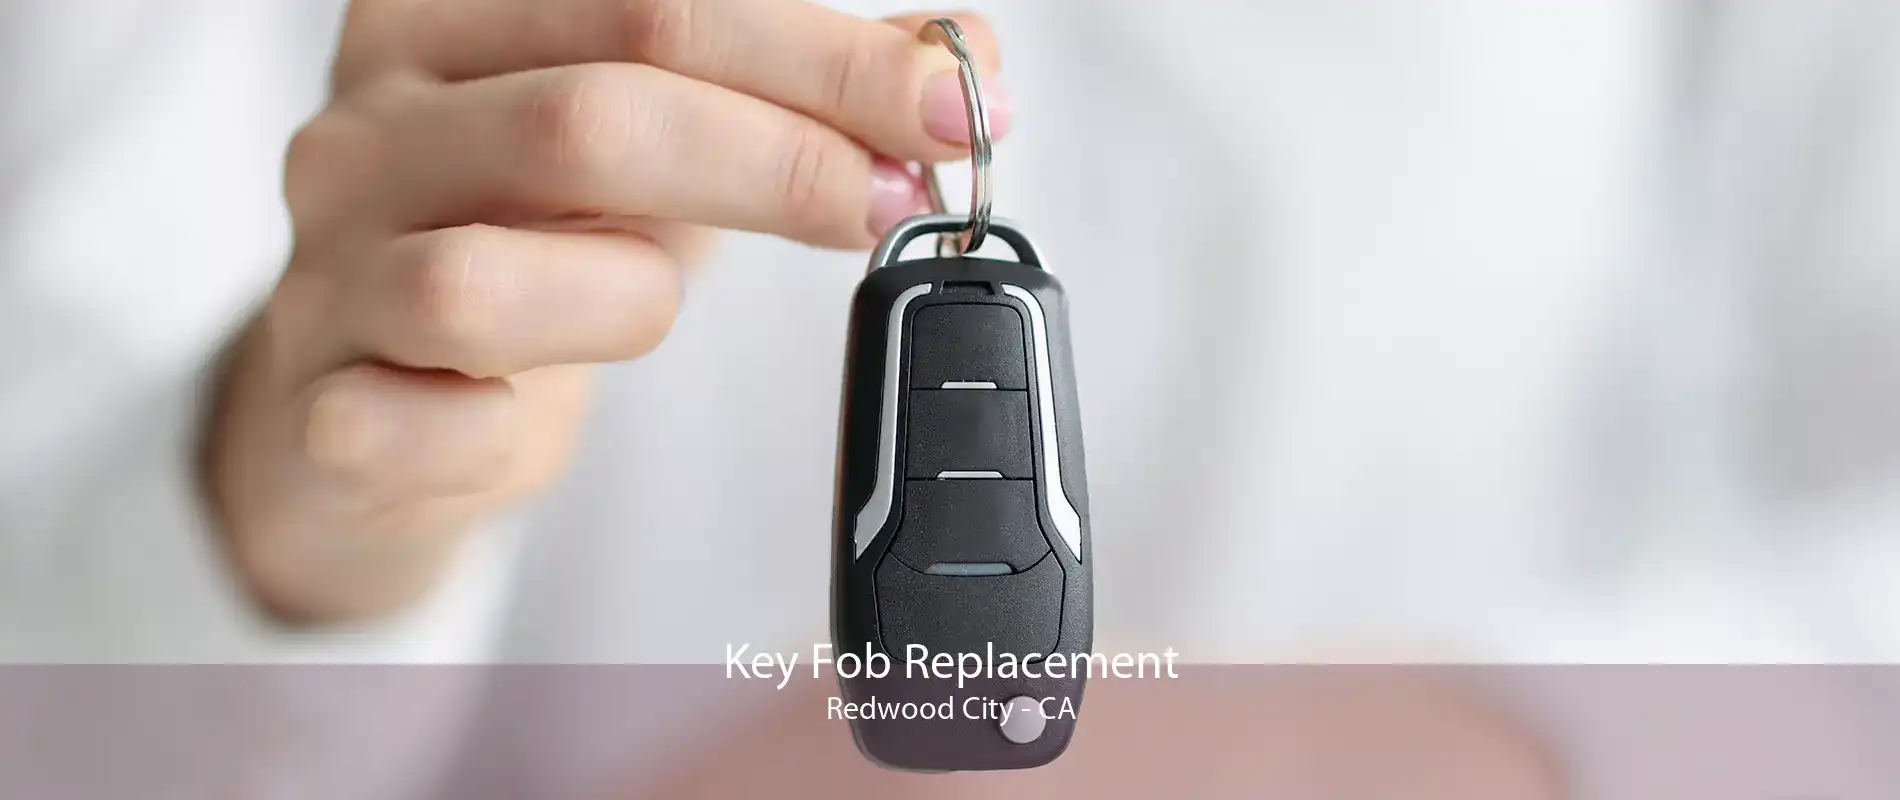 Key Fob Replacement Redwood City - CA